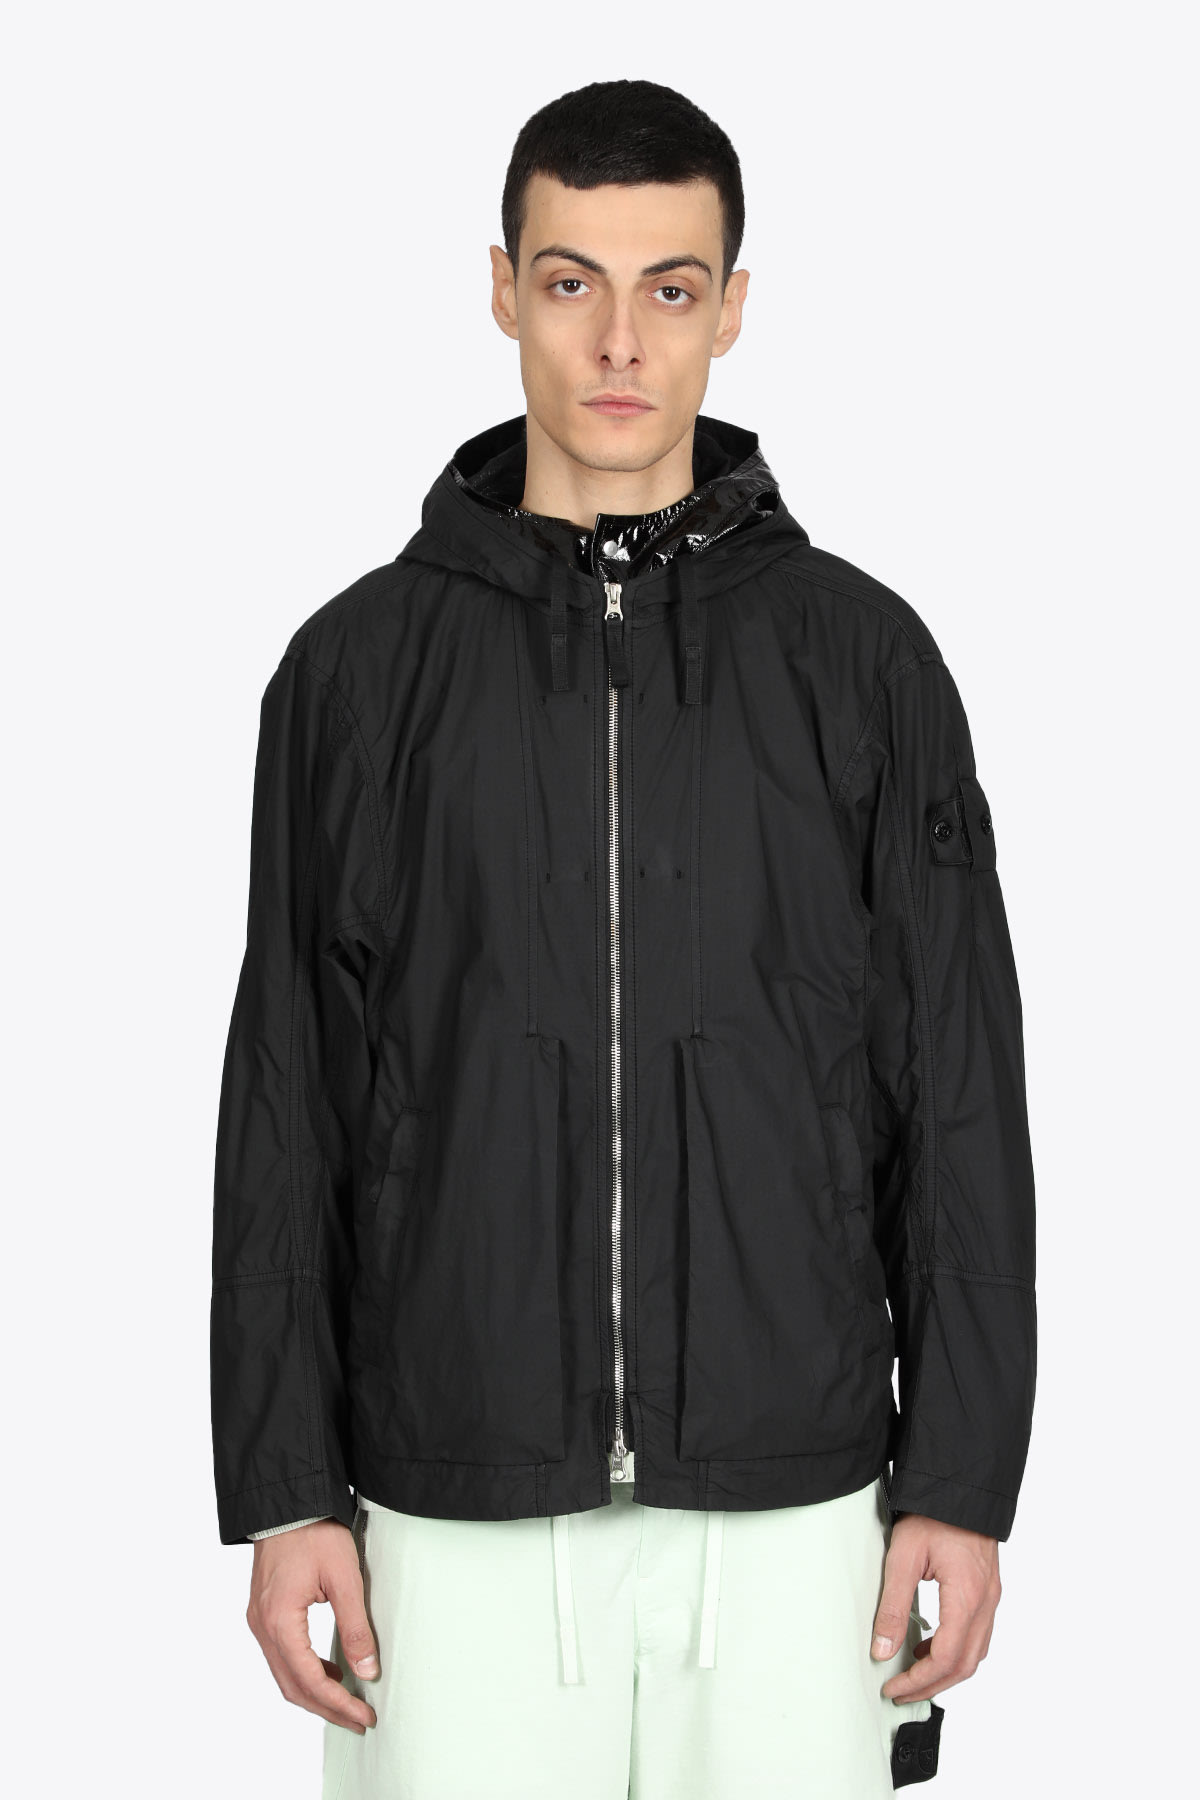 Stone Island Shadow Project Short Parka Chapter 2 Black cotton short parka with detachable hoodie